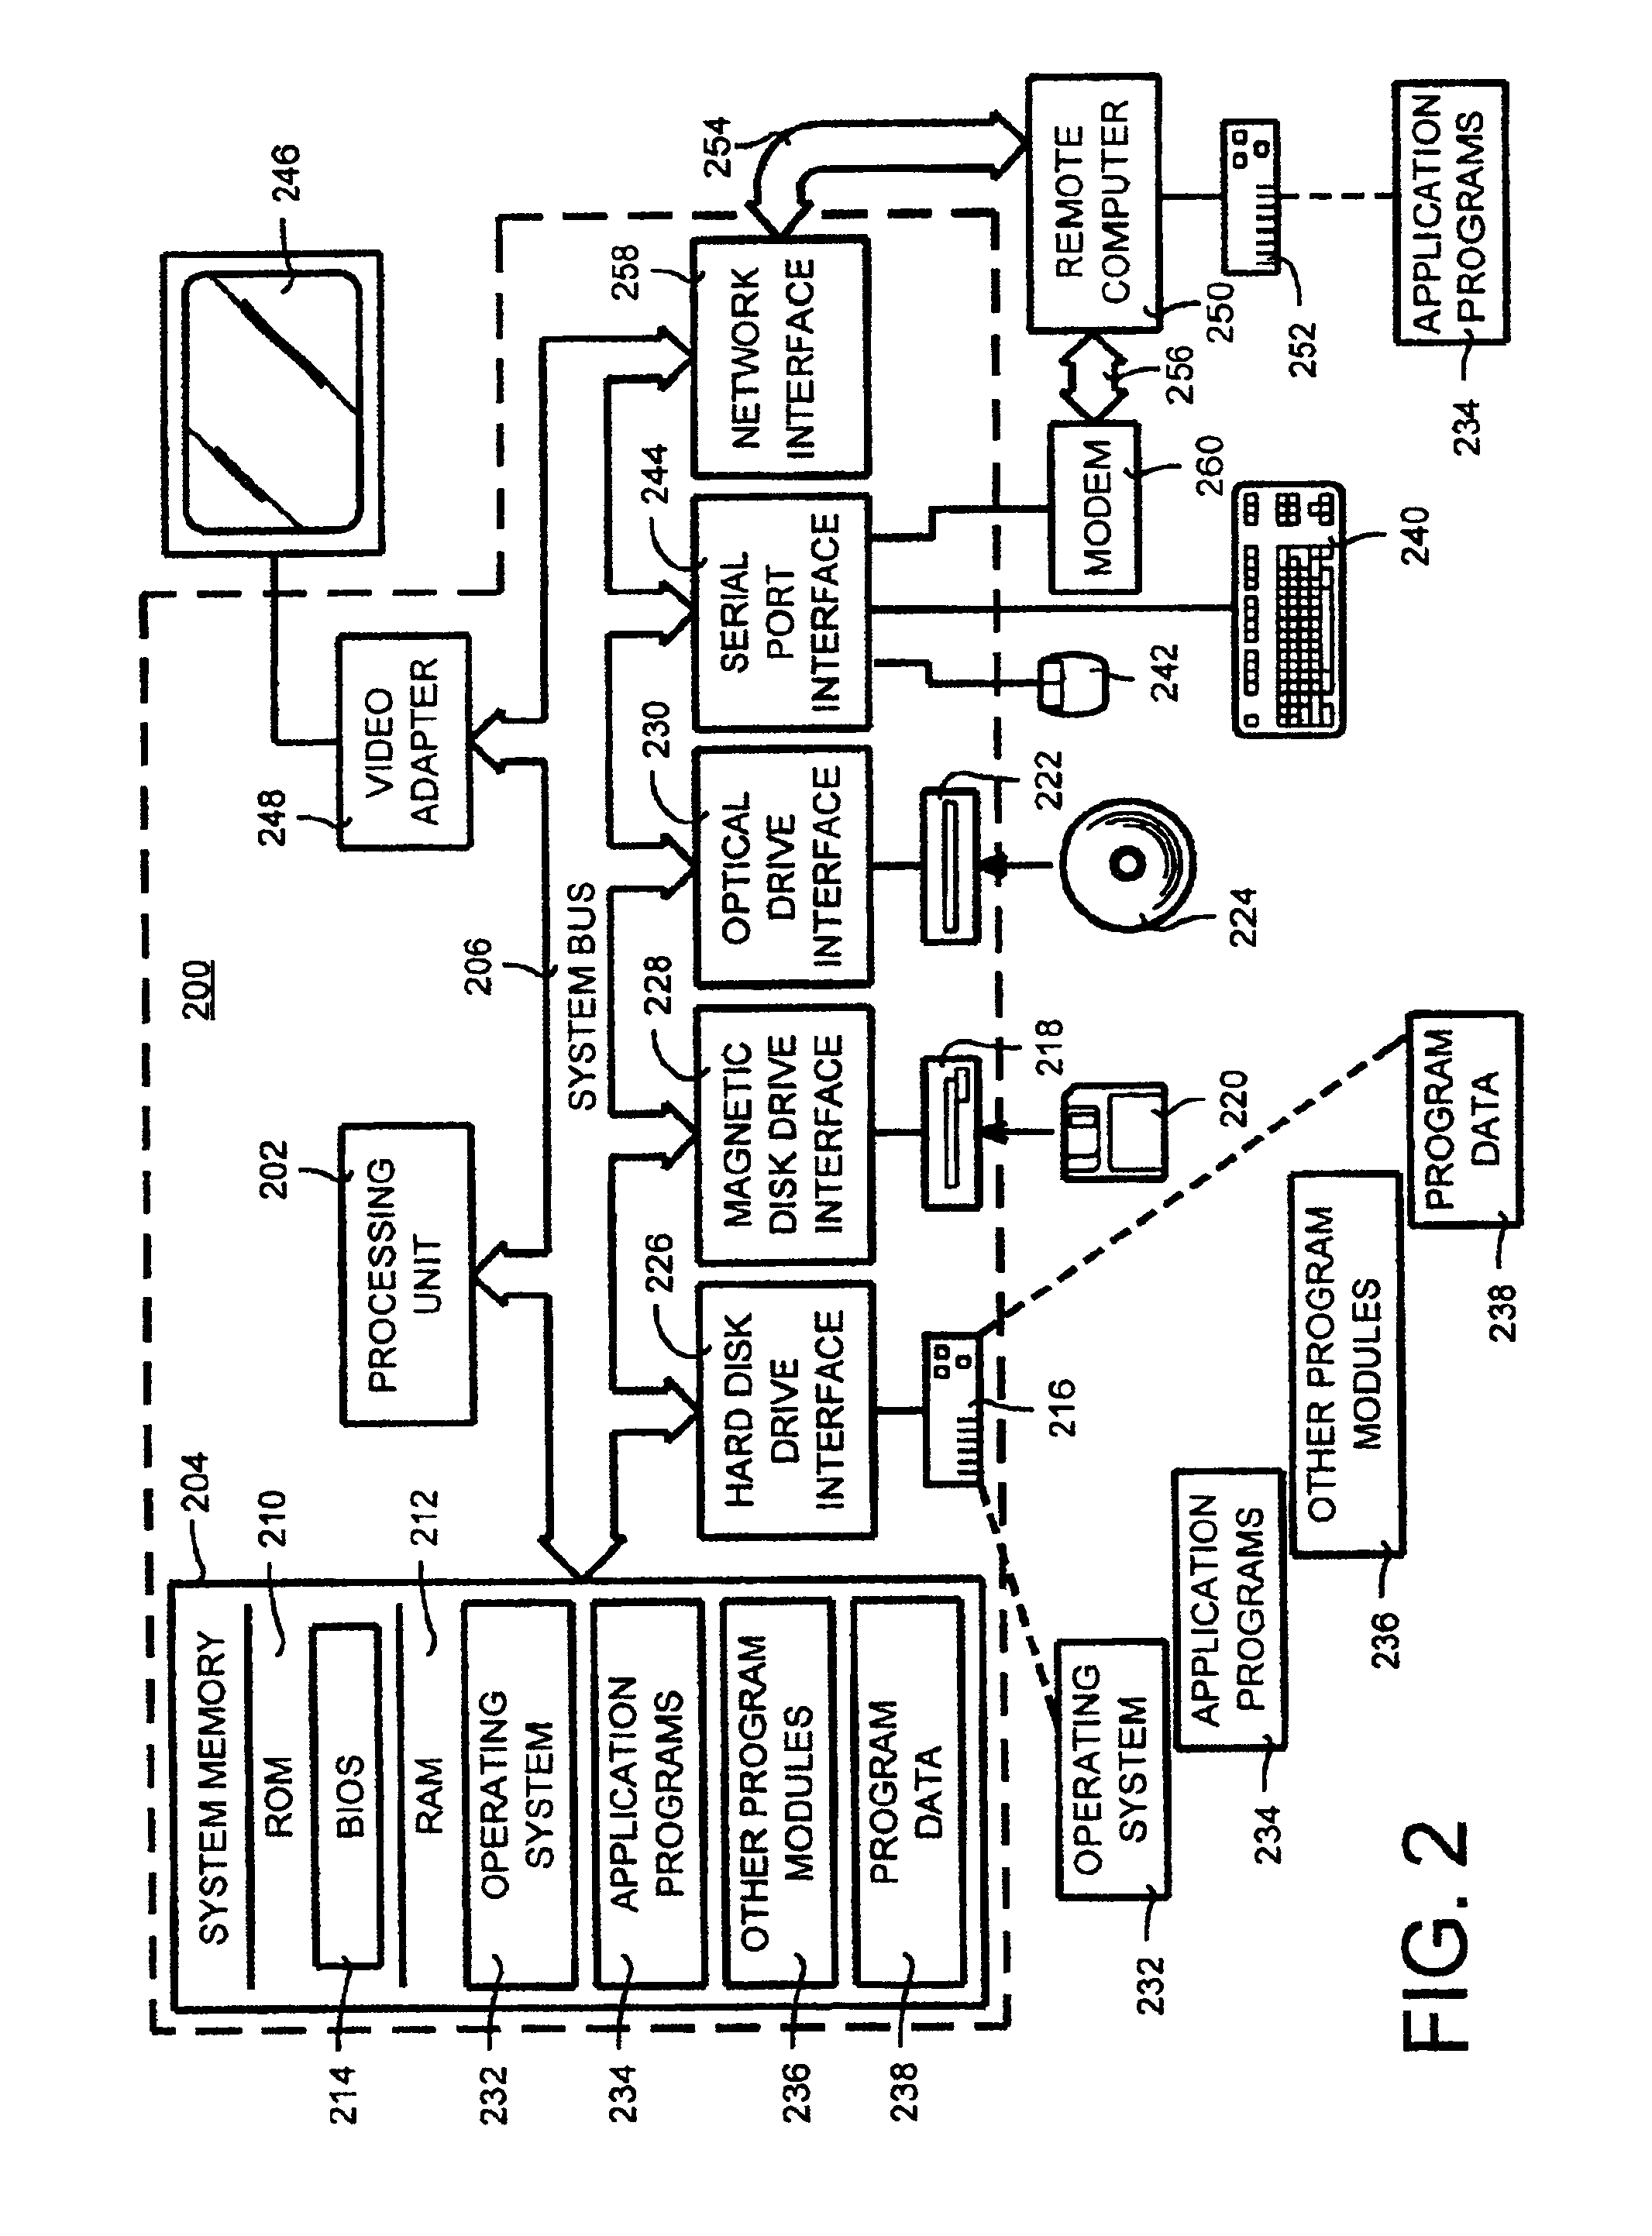 Automated online broadcasting system and method using an omni-directional camera system for viewing meetings over a computer network